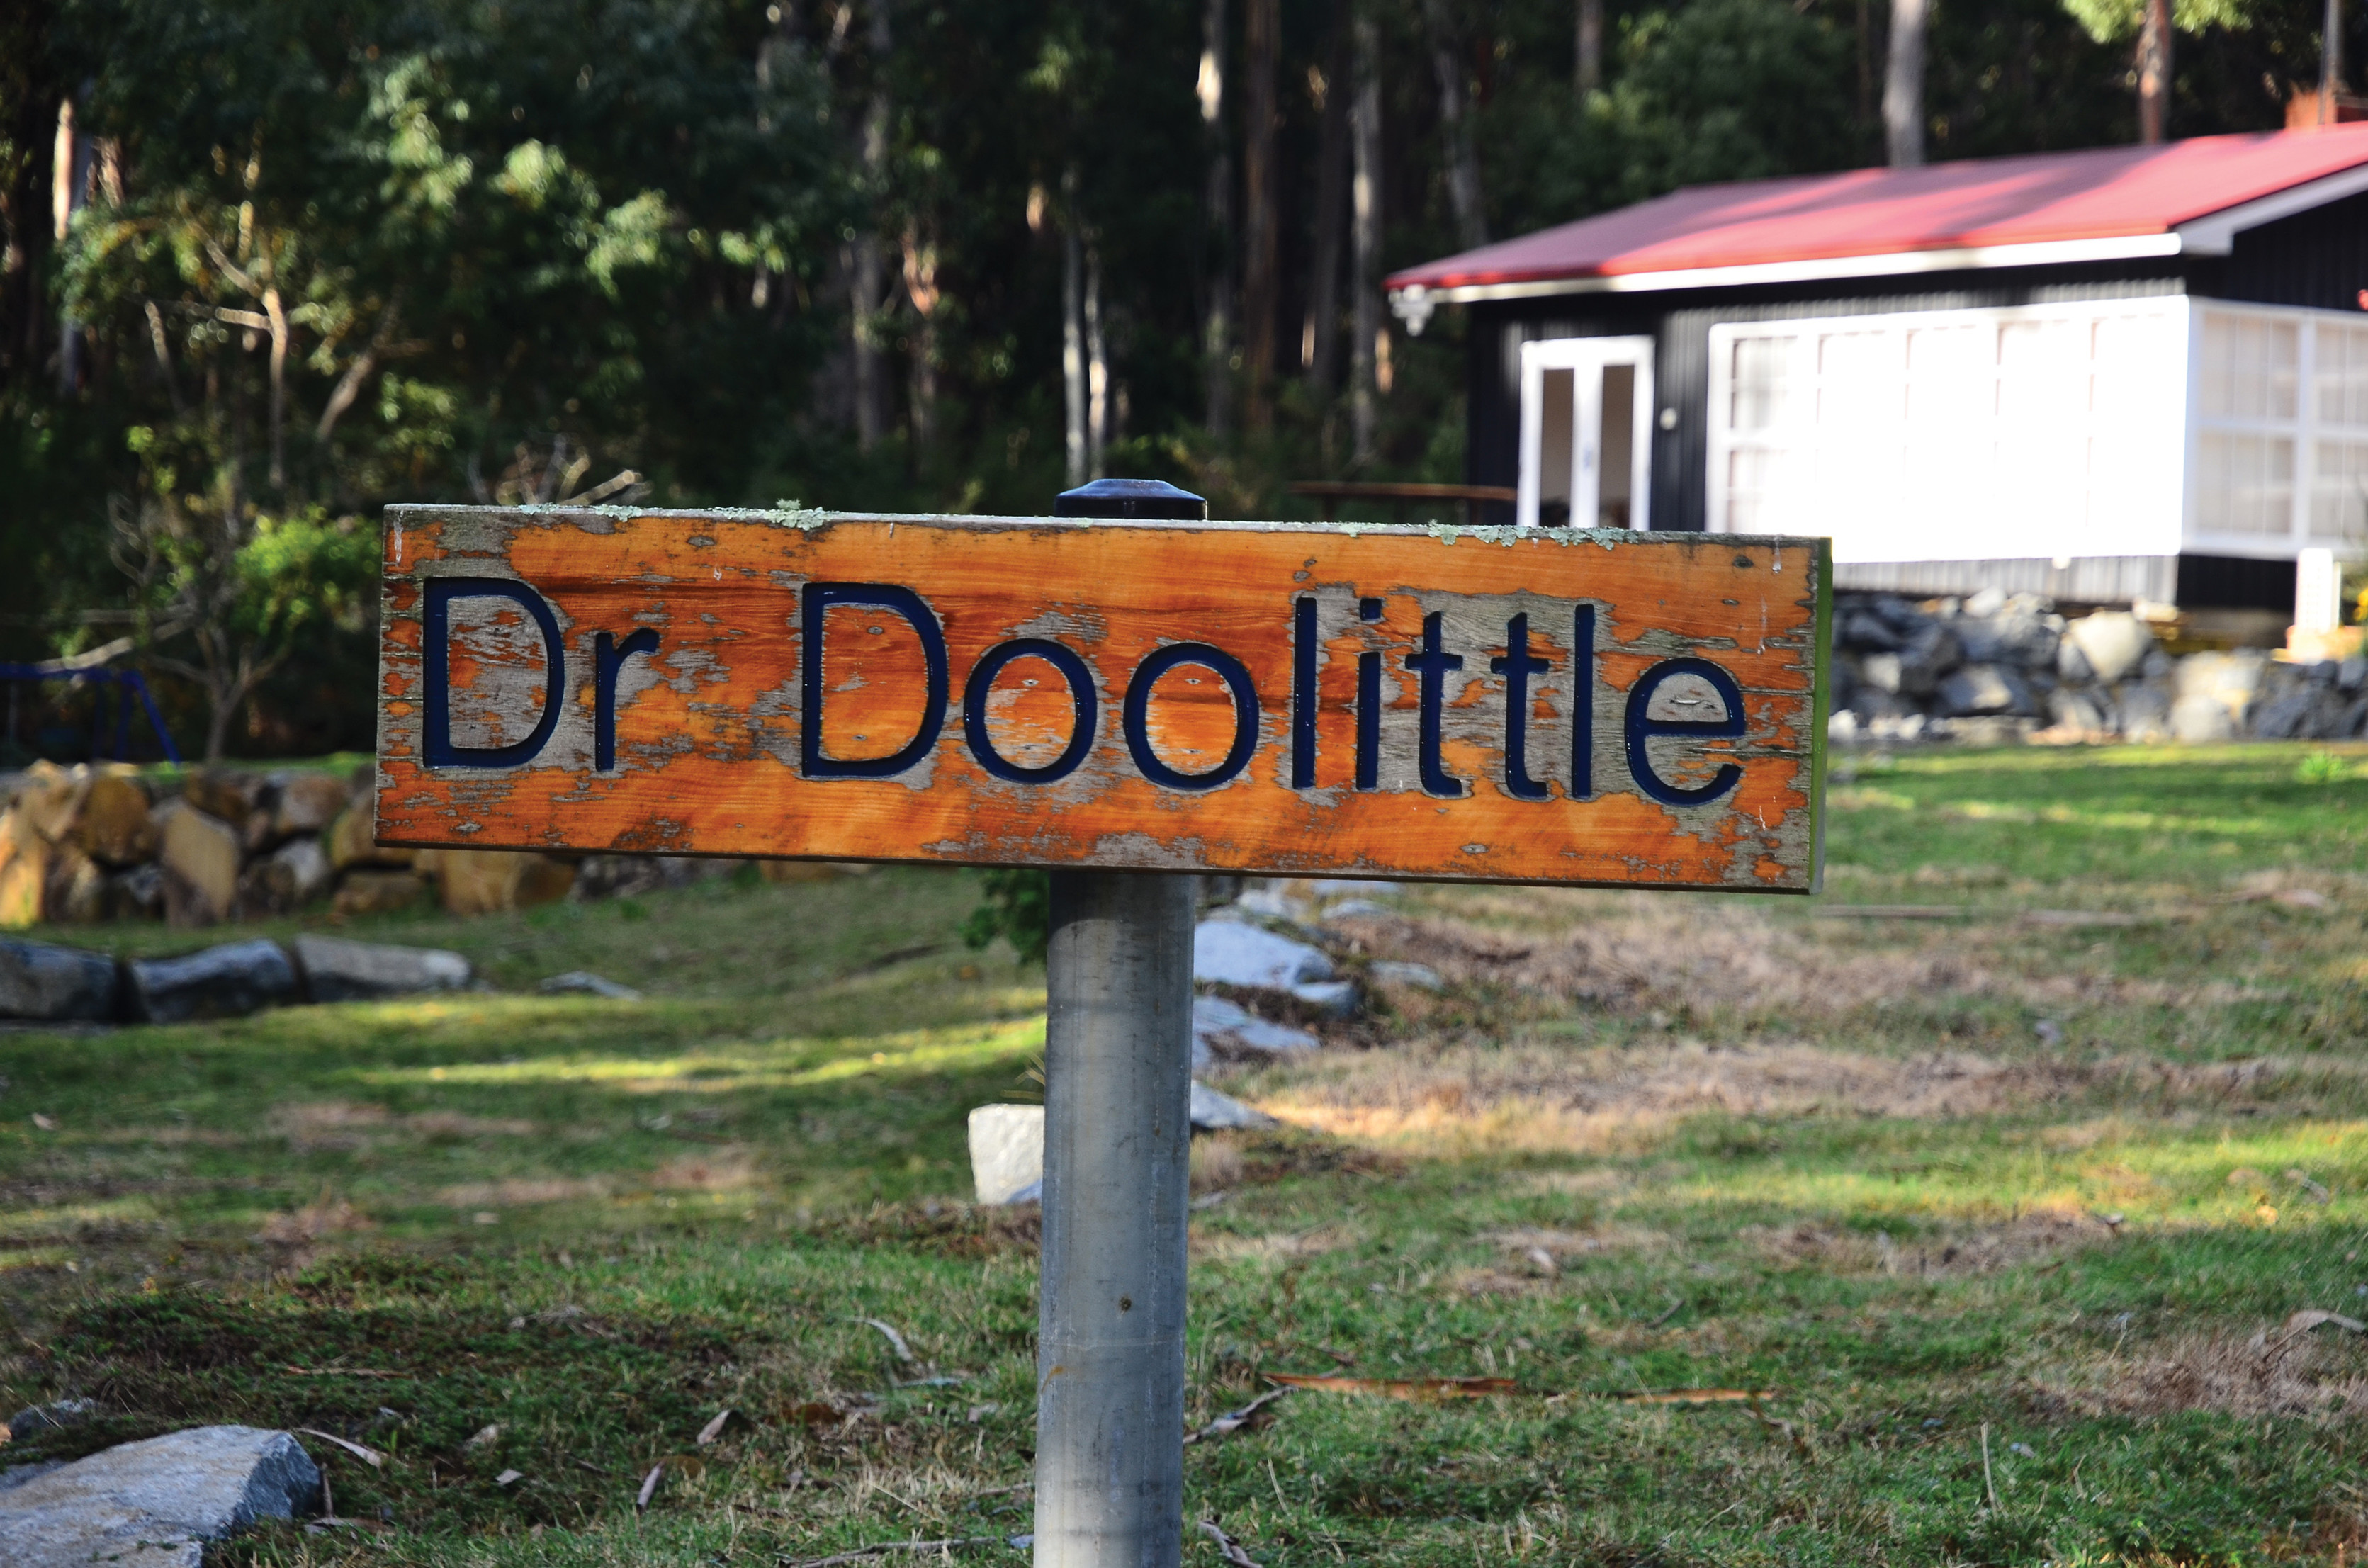 Image of the Dr Doolittle sign, rustic and orange in colour.